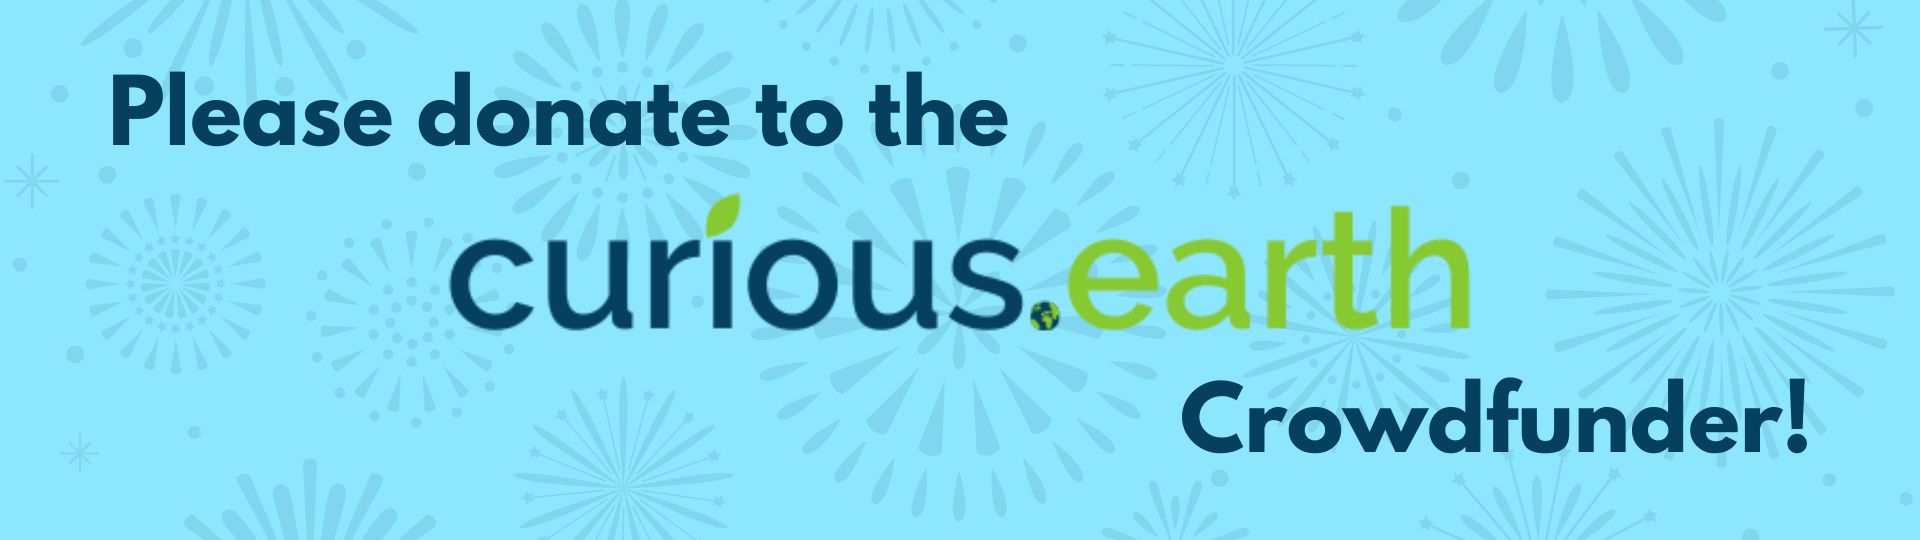 Please donate to the curious.earth crowdfunder